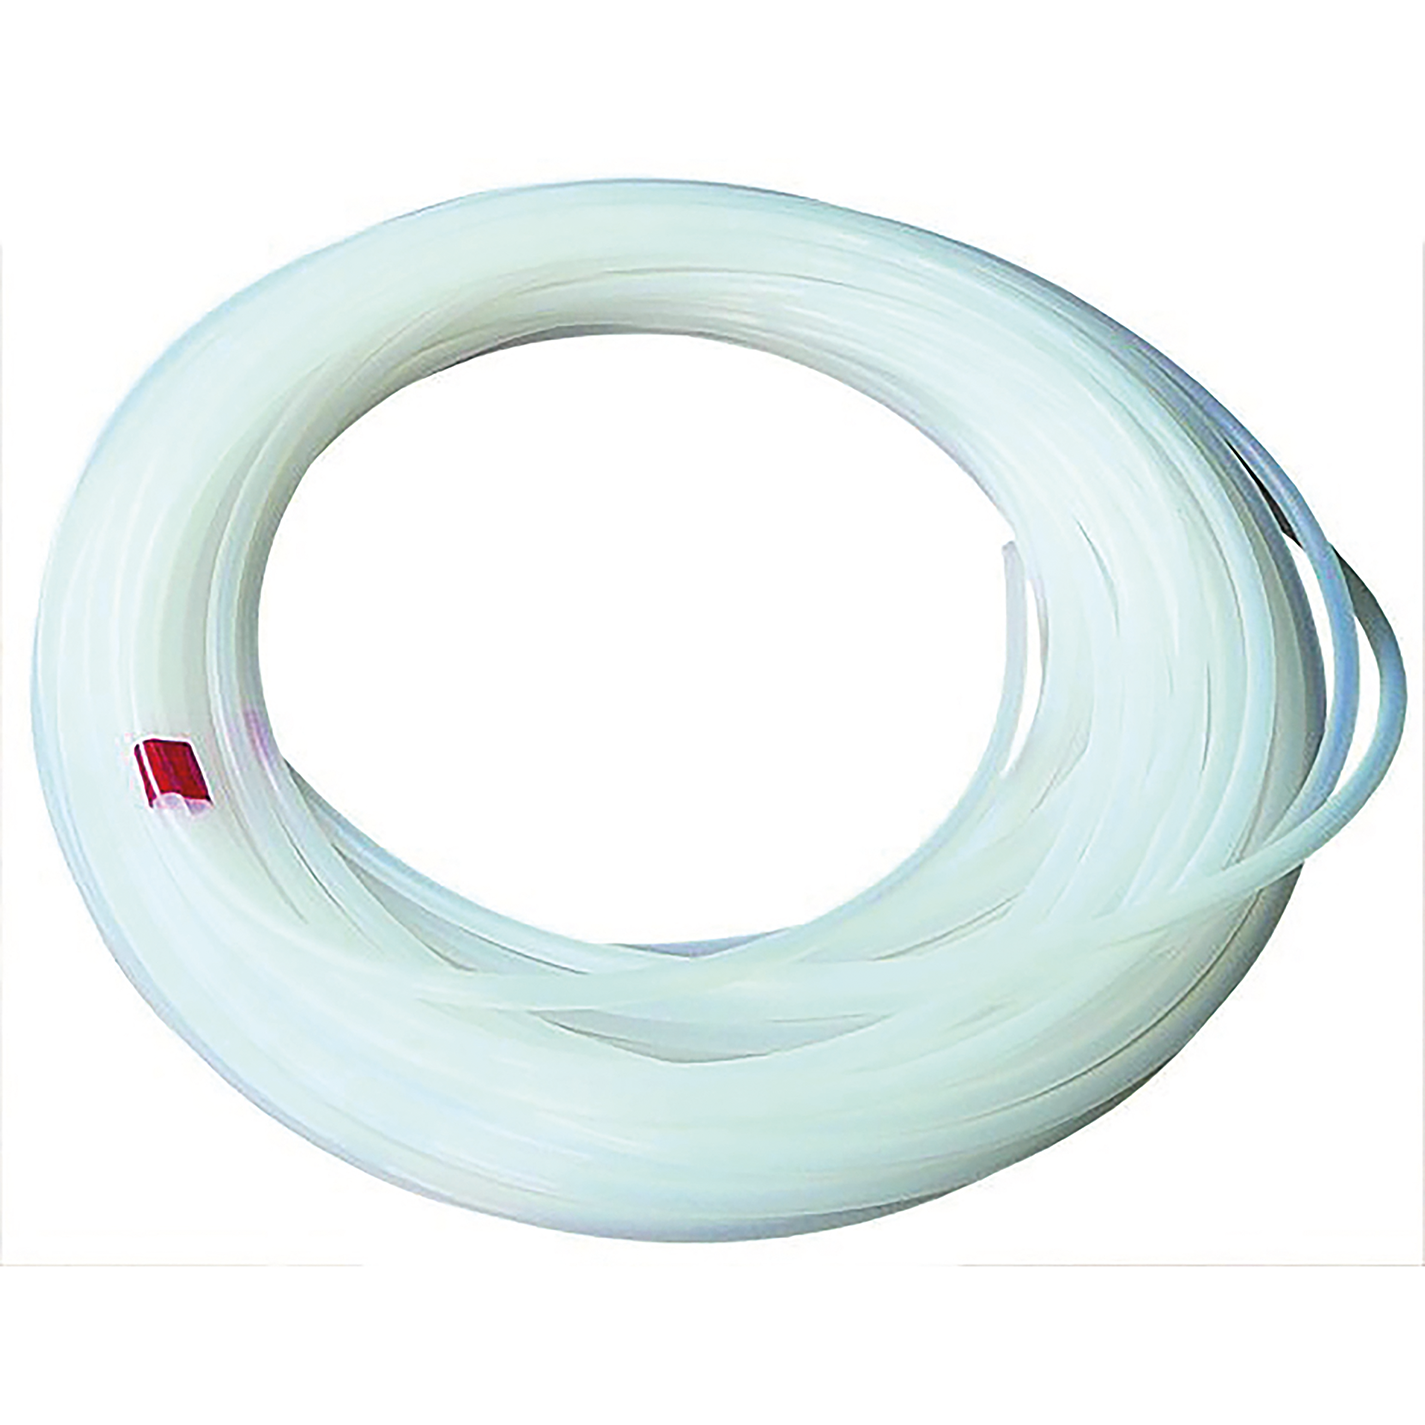 10mm ID x 12mm OD Flexible Low Friction Tube